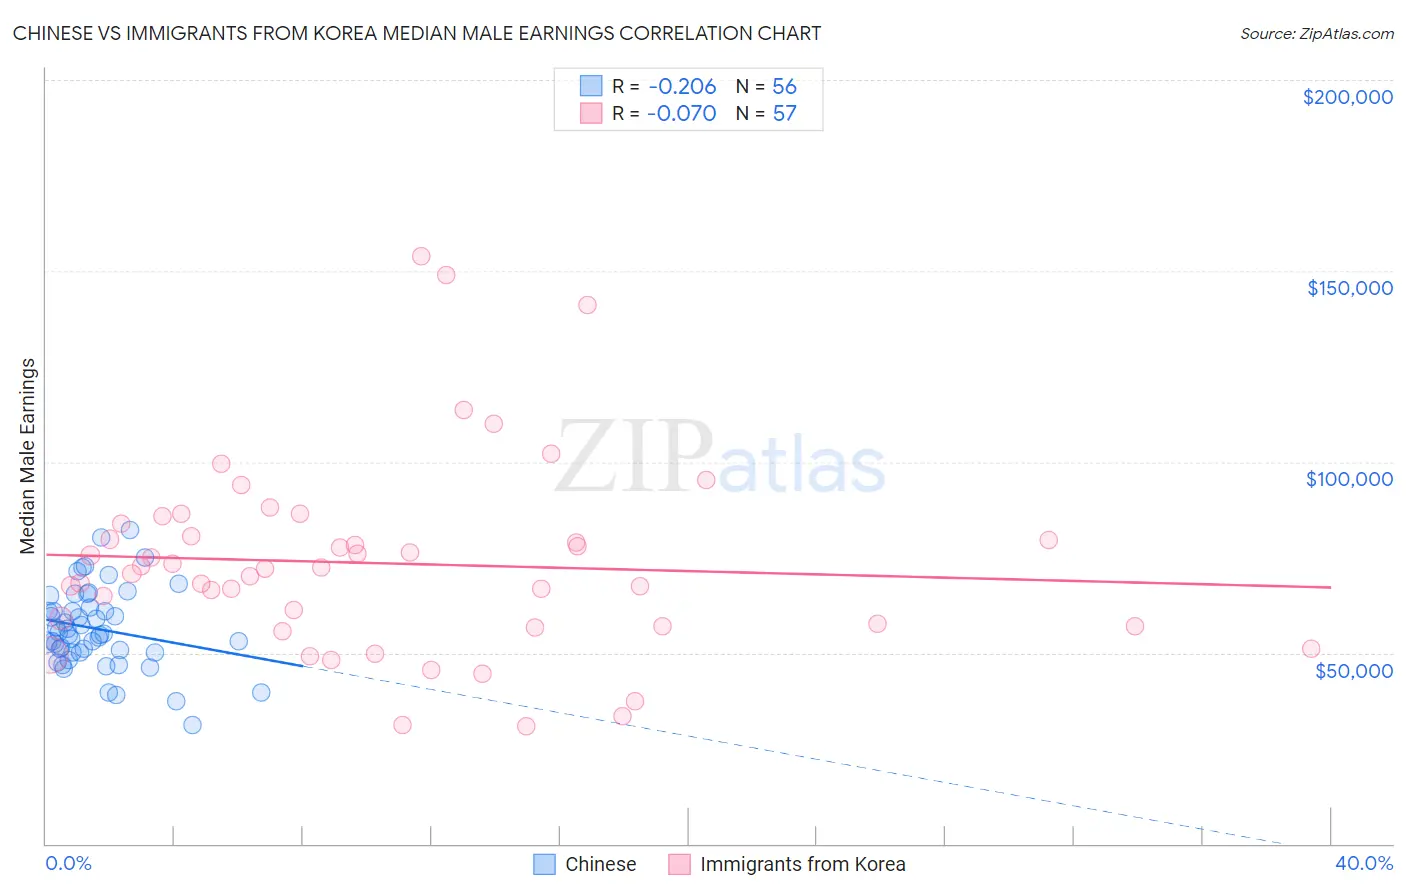 Chinese vs Immigrants from Korea Median Male Earnings